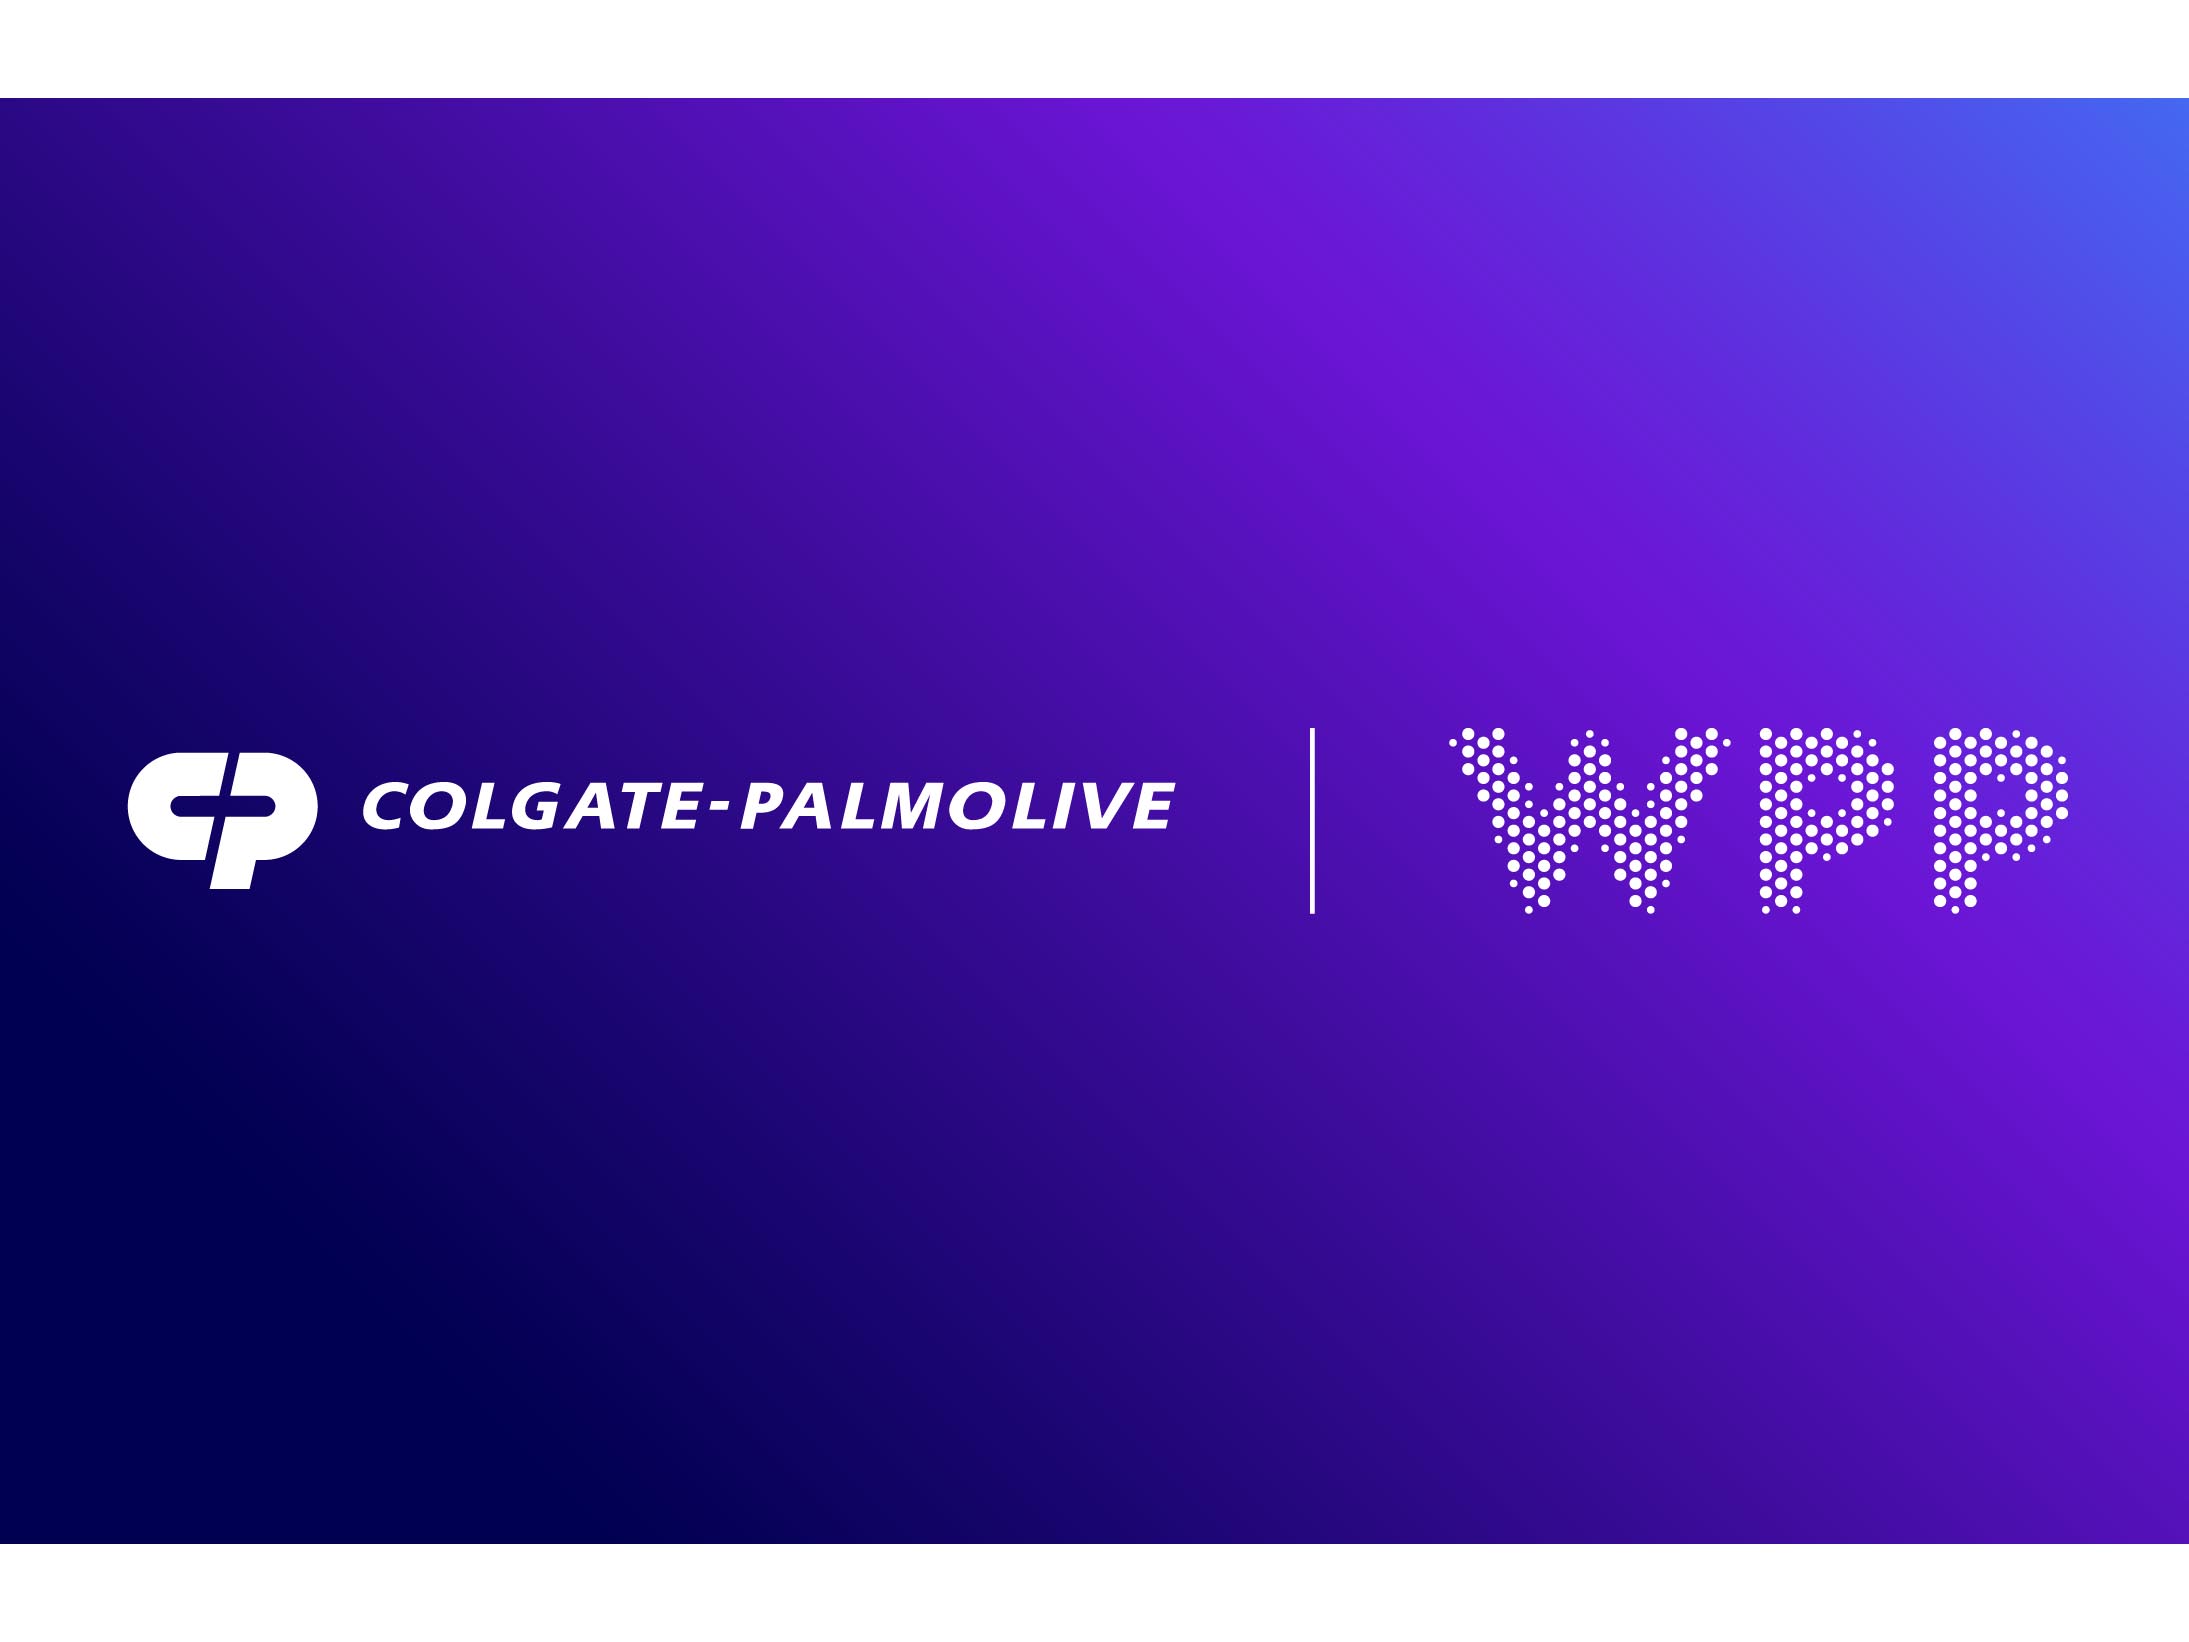 WPP chosen as Colgate-Palmolive’s agency of record for Amazon in Europe